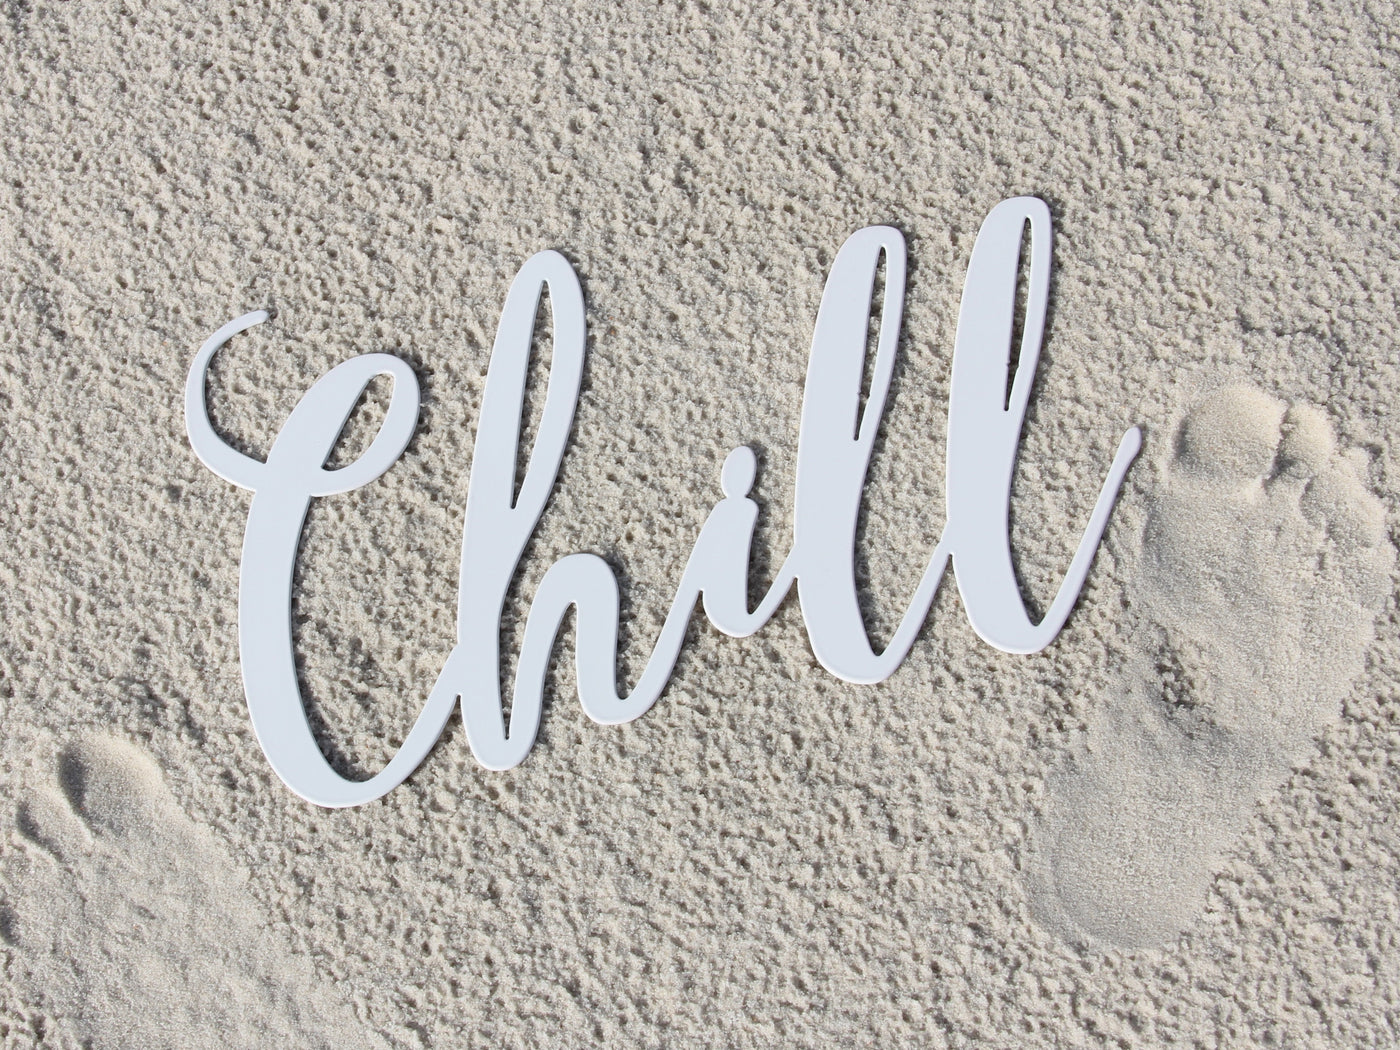 Chill Metal Word Sign - Madison Iron and Wood - Metal Art - metal outdoor decor - Steel deocrations - american made products - veteran owned business products - fencing decorations - fencing supplies - custom wall decorations - personalized wall signs - steel - decorative post caps - steel post caps - metal post caps - brackets - structural brackets - home improvement - easter - easter decorations - easter gift - easter yard decor